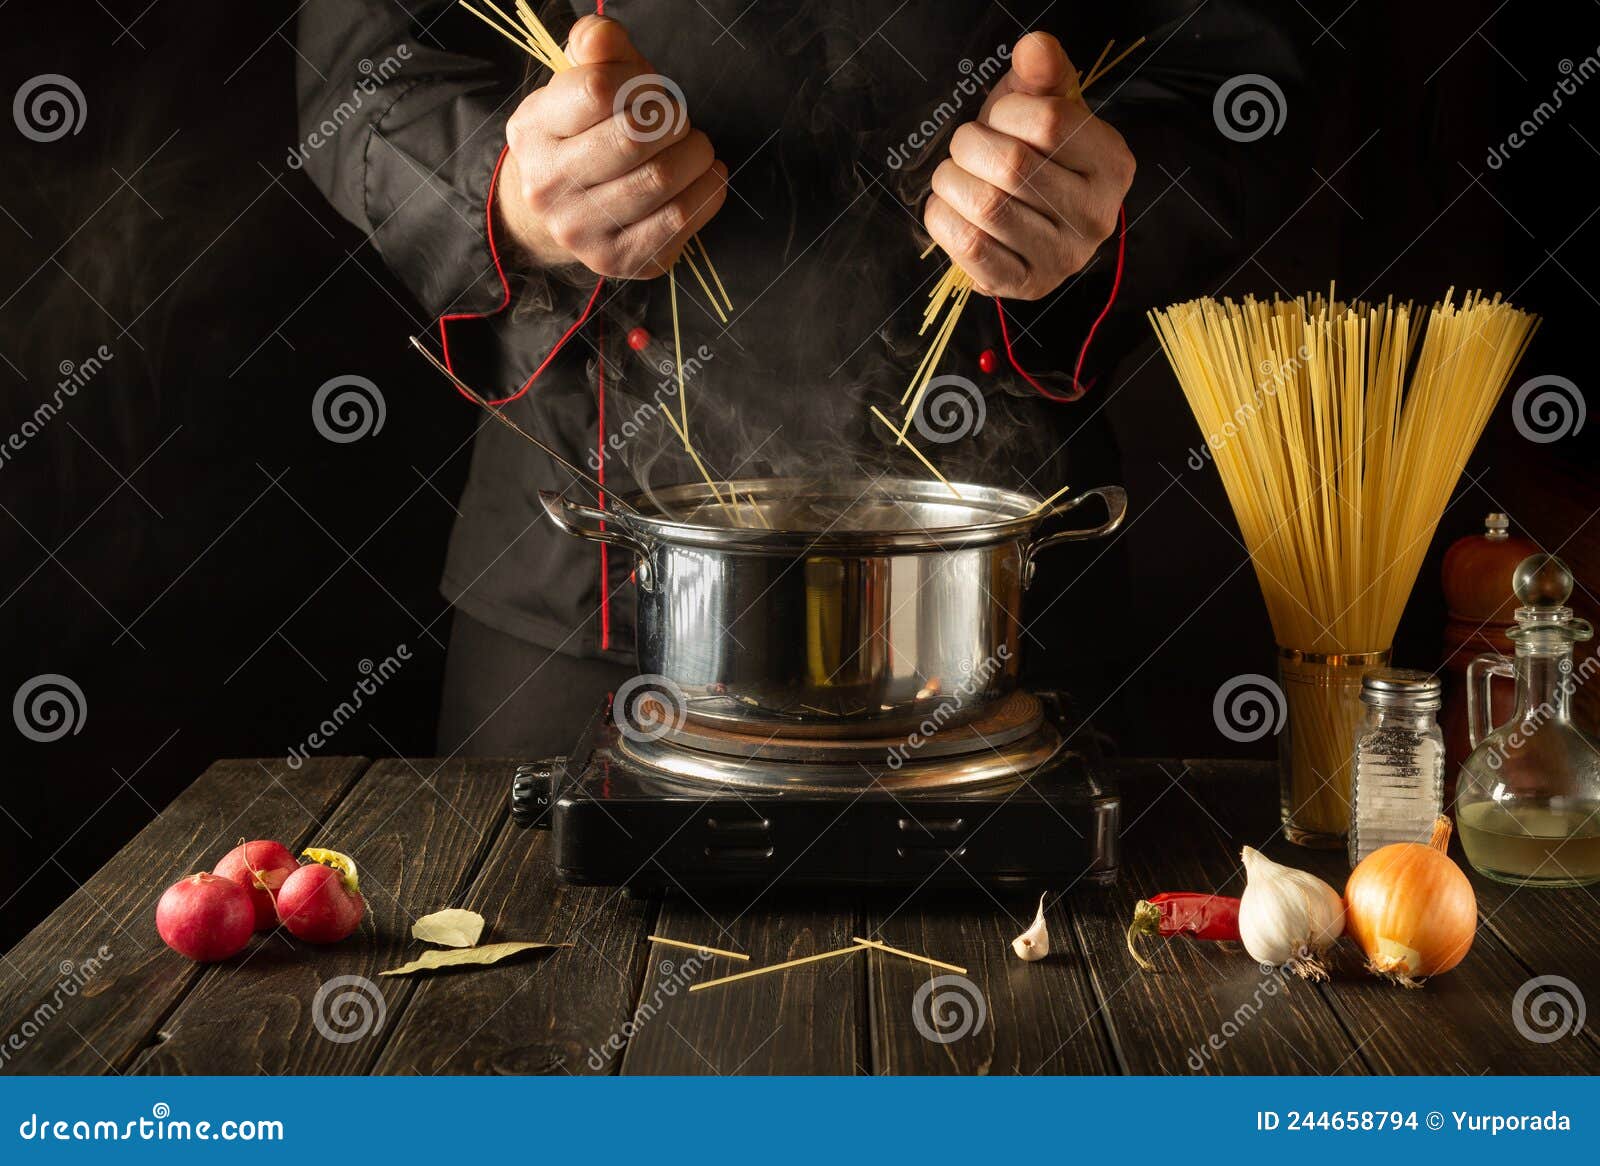 chef prepares italian pasta in a saucepan with vegetables. close-up of cook hands while cooking in kitchen. cucina italiana